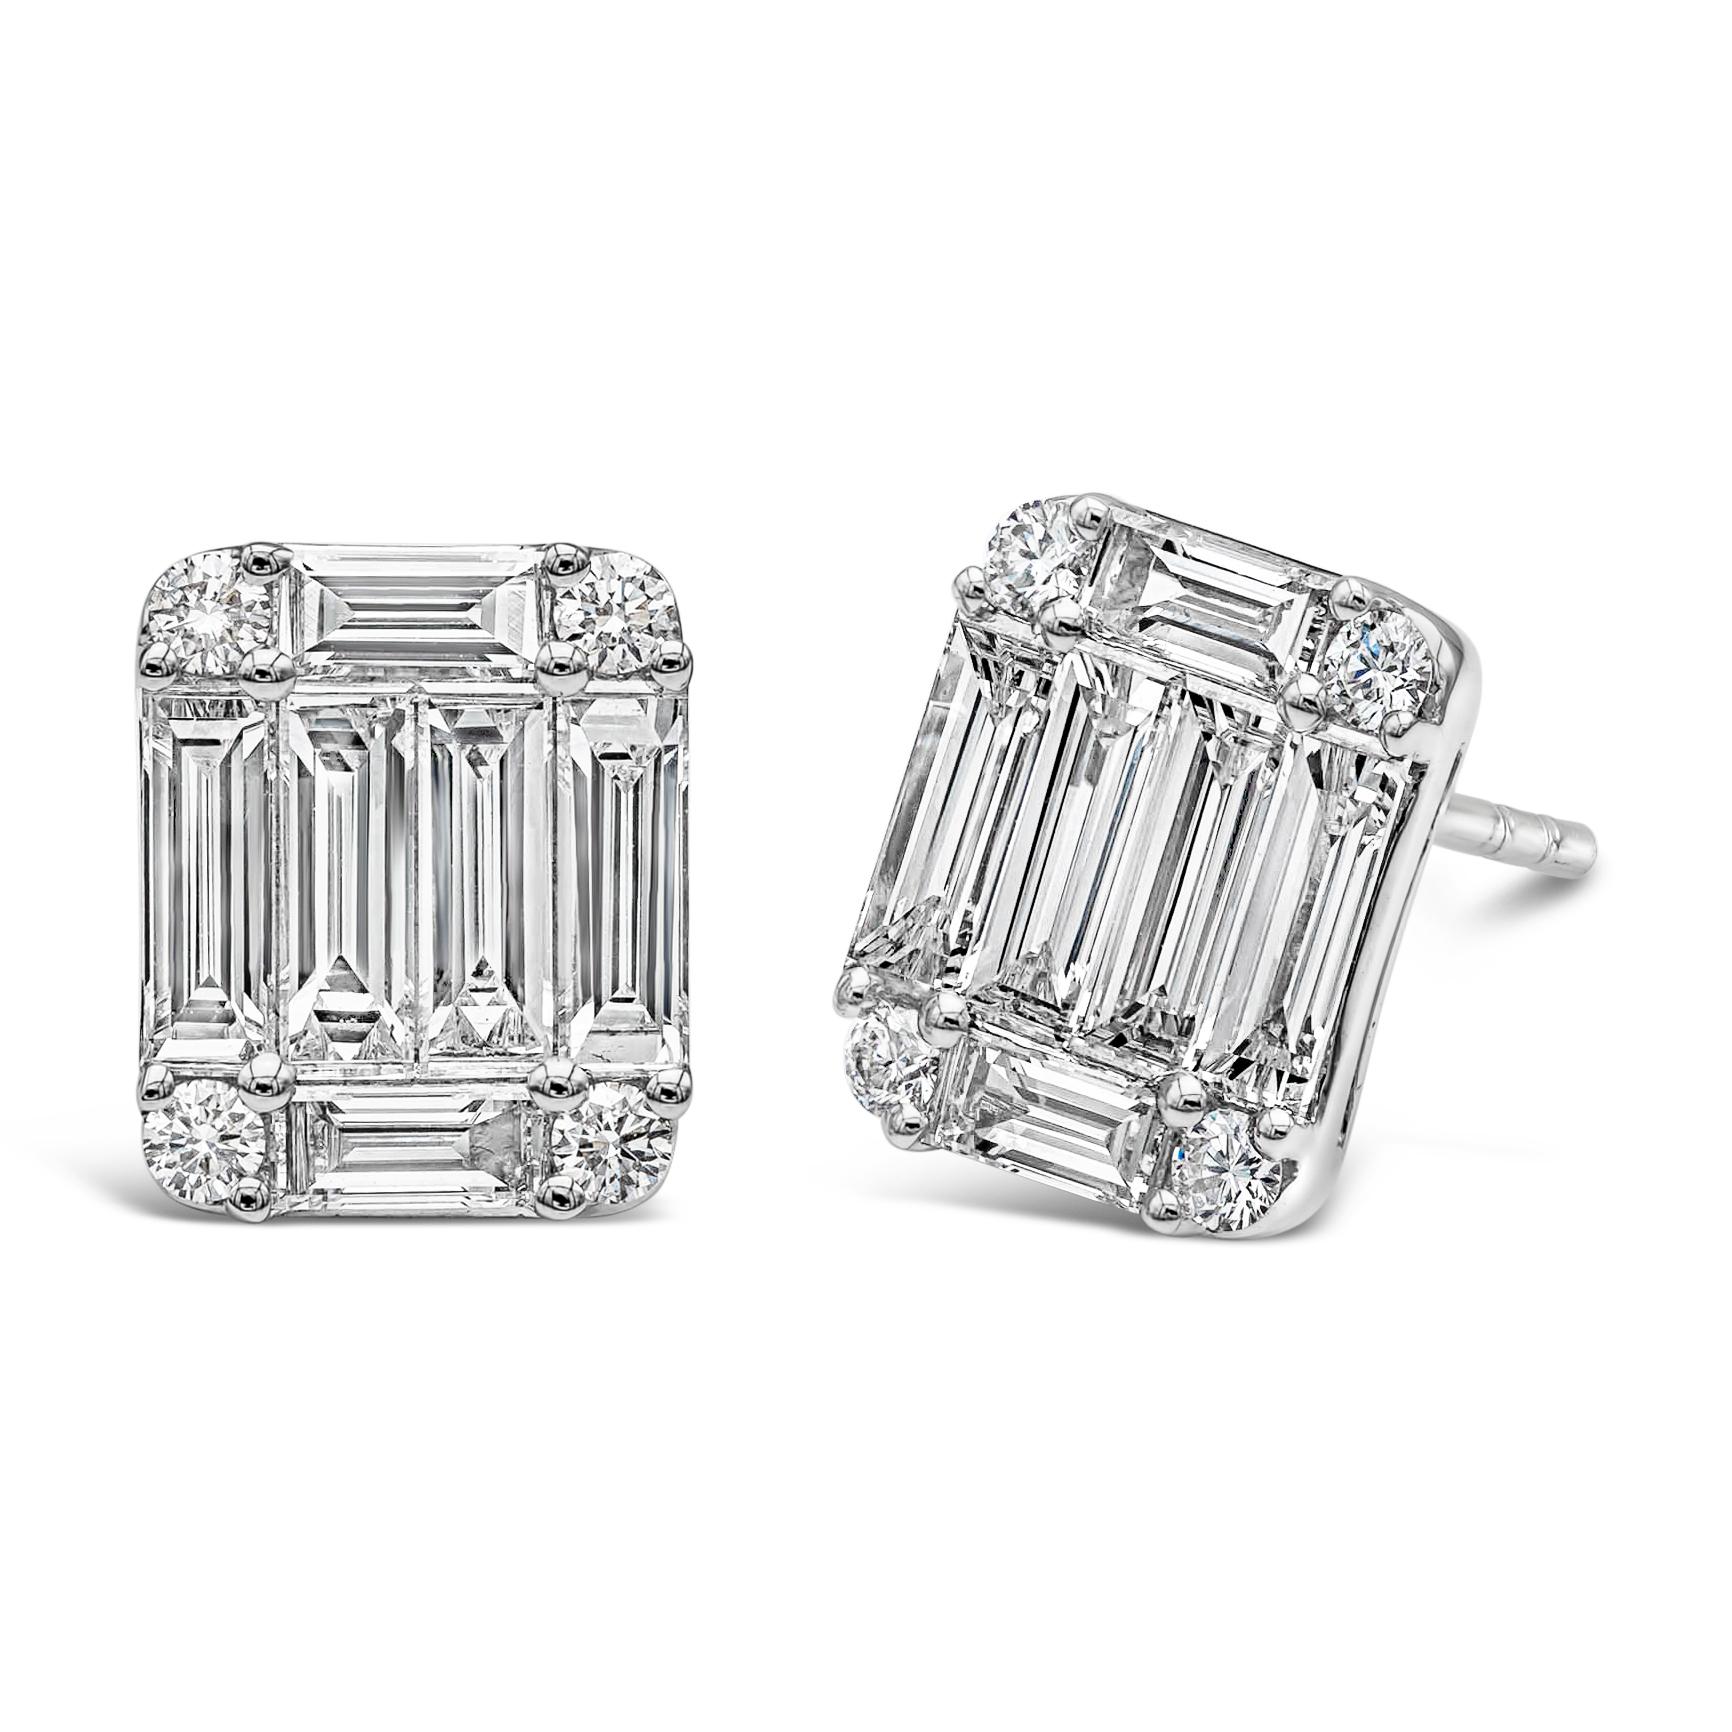 A unique pair of stud earrings showcasing a cluster of baguette and round diamonds, arranged to look like a large 4 carat emerald cut diamond. Baguettes weighs 1.76 carats total, and round diamonds weigh 0.20 carats total, F Color and VS in Clarity.